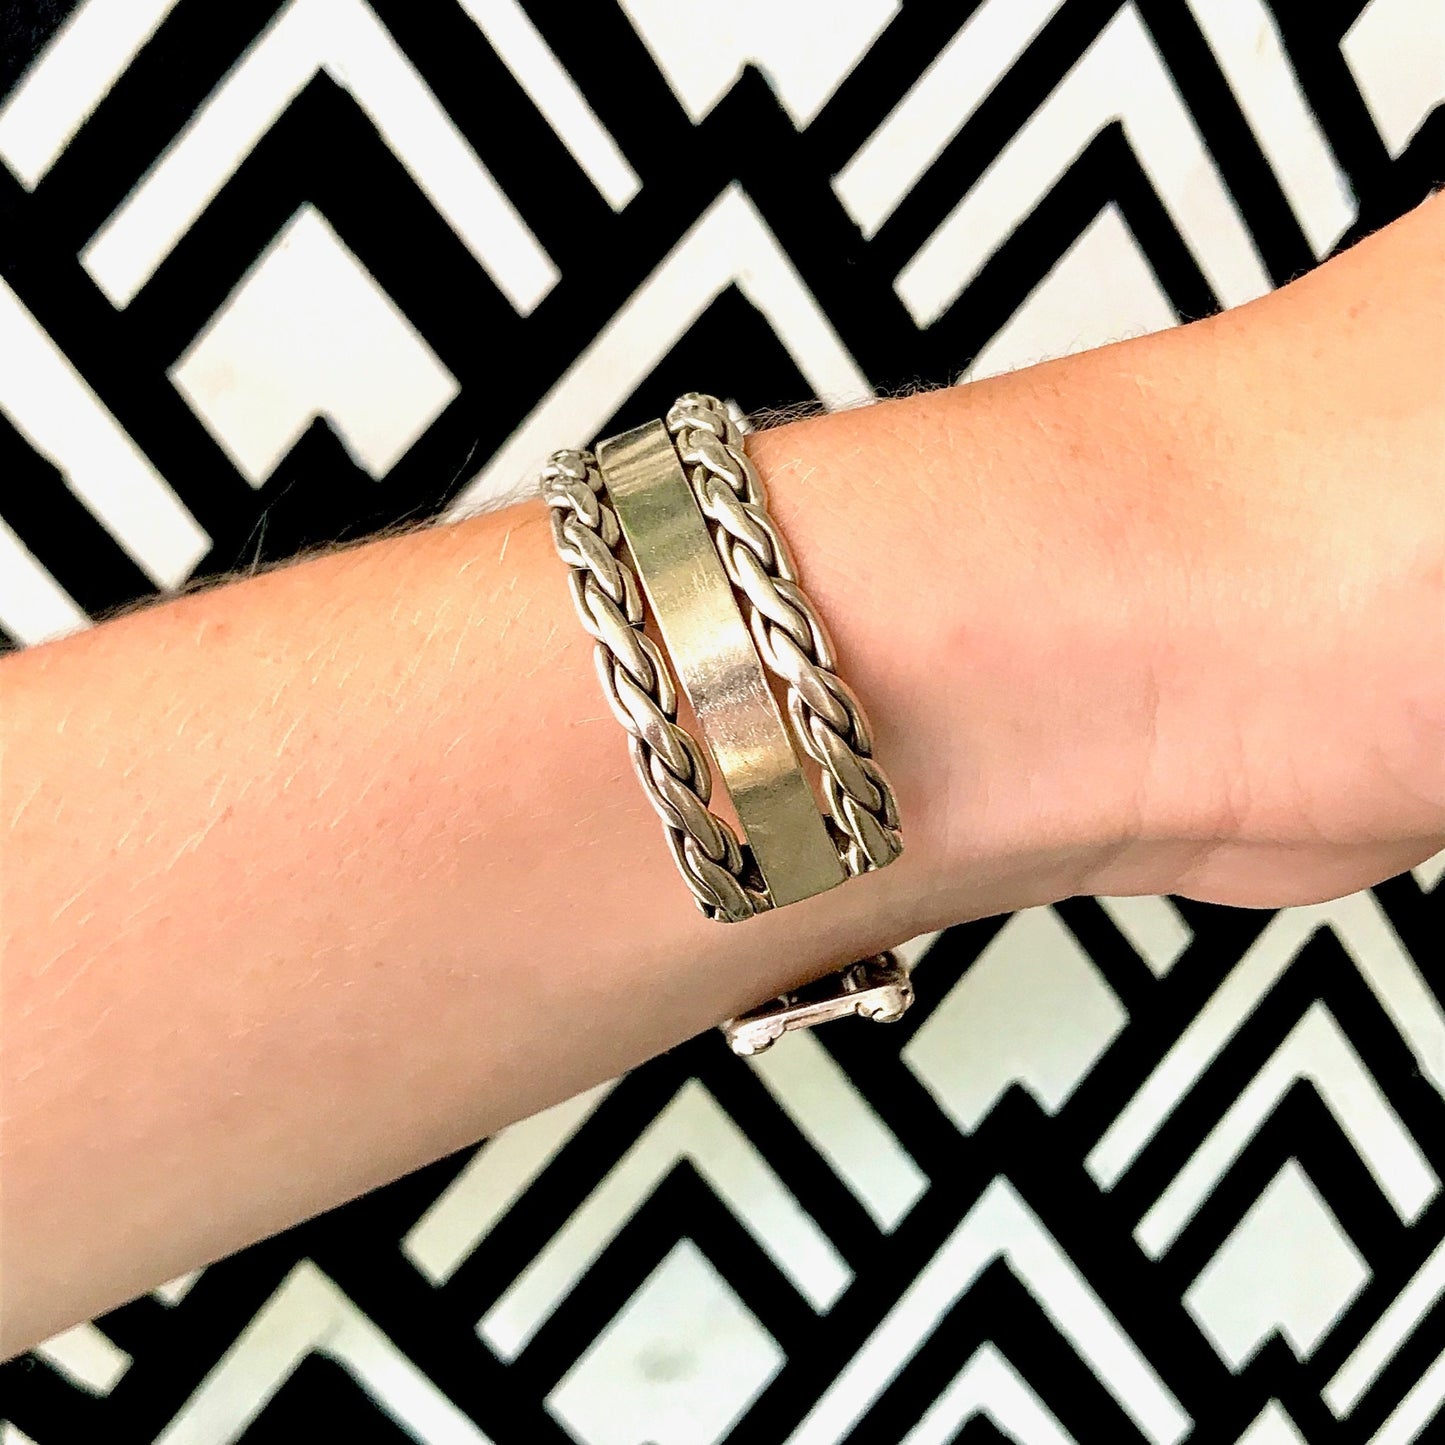 Vintage sterling silver cuff bracelet with woven chain detail on wrist against black and white geometric patterned background